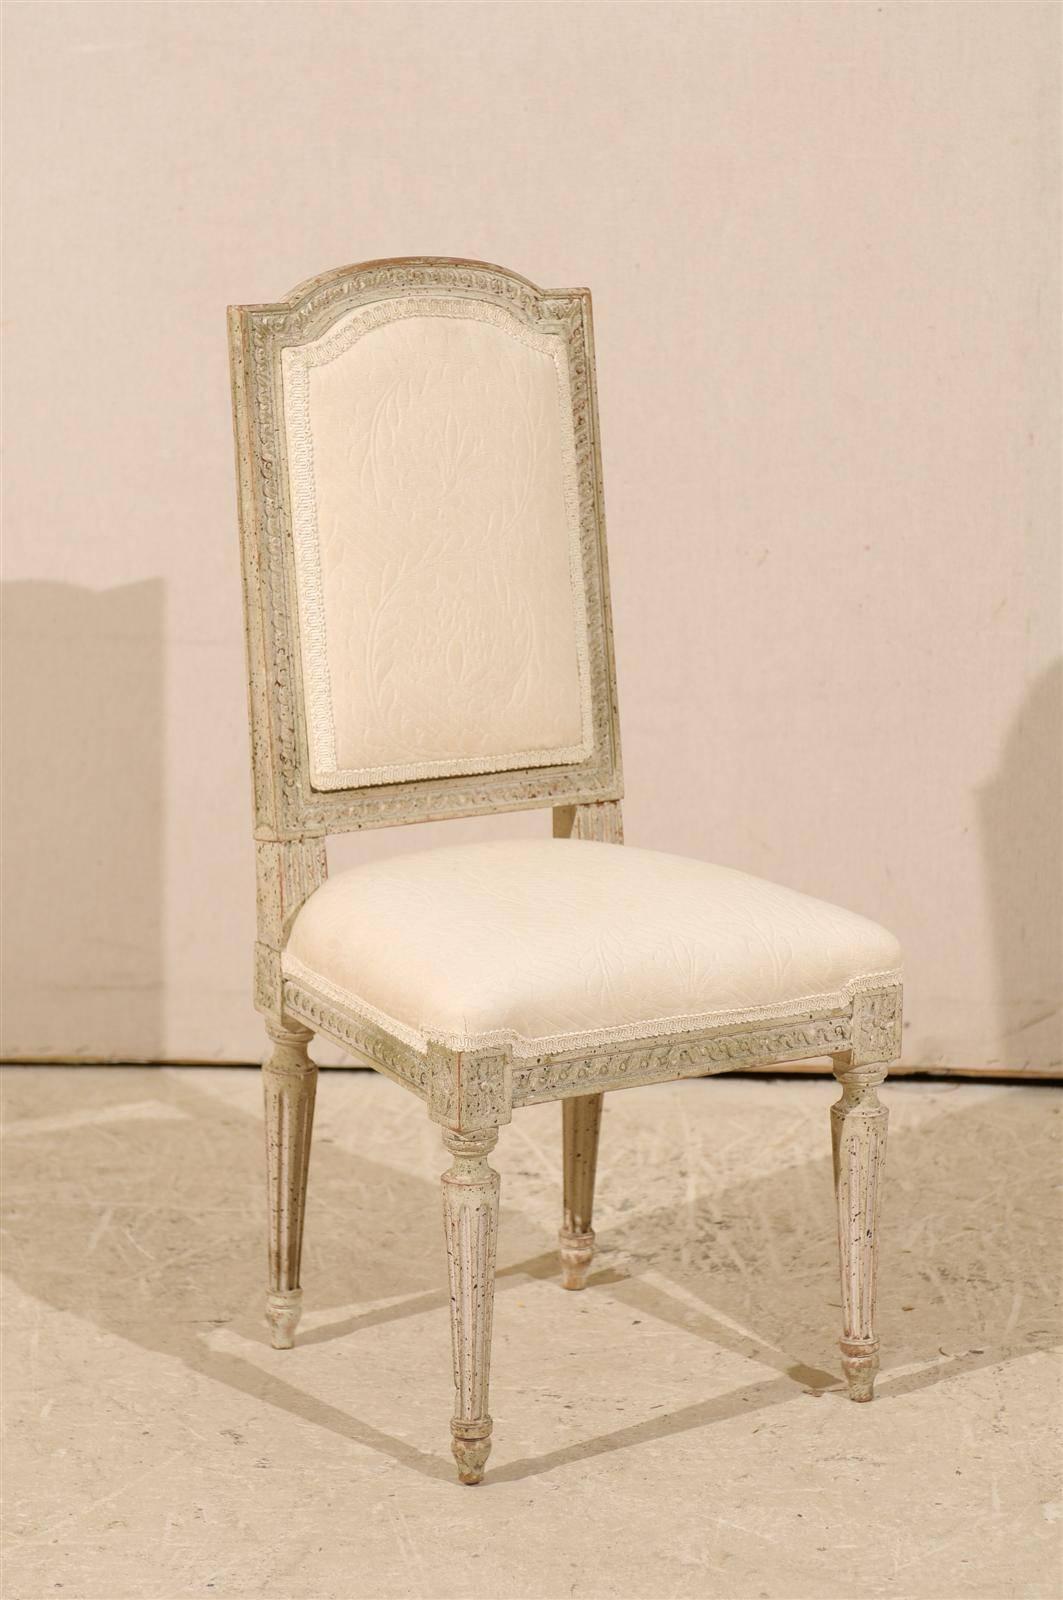 A French painted wood upholstered child's chair. This cute Louis XVI style child's chair is made of painted wood and is decorated with a carved molding throughout the frame, rosettes on the knees and flutes legs, 20th century.